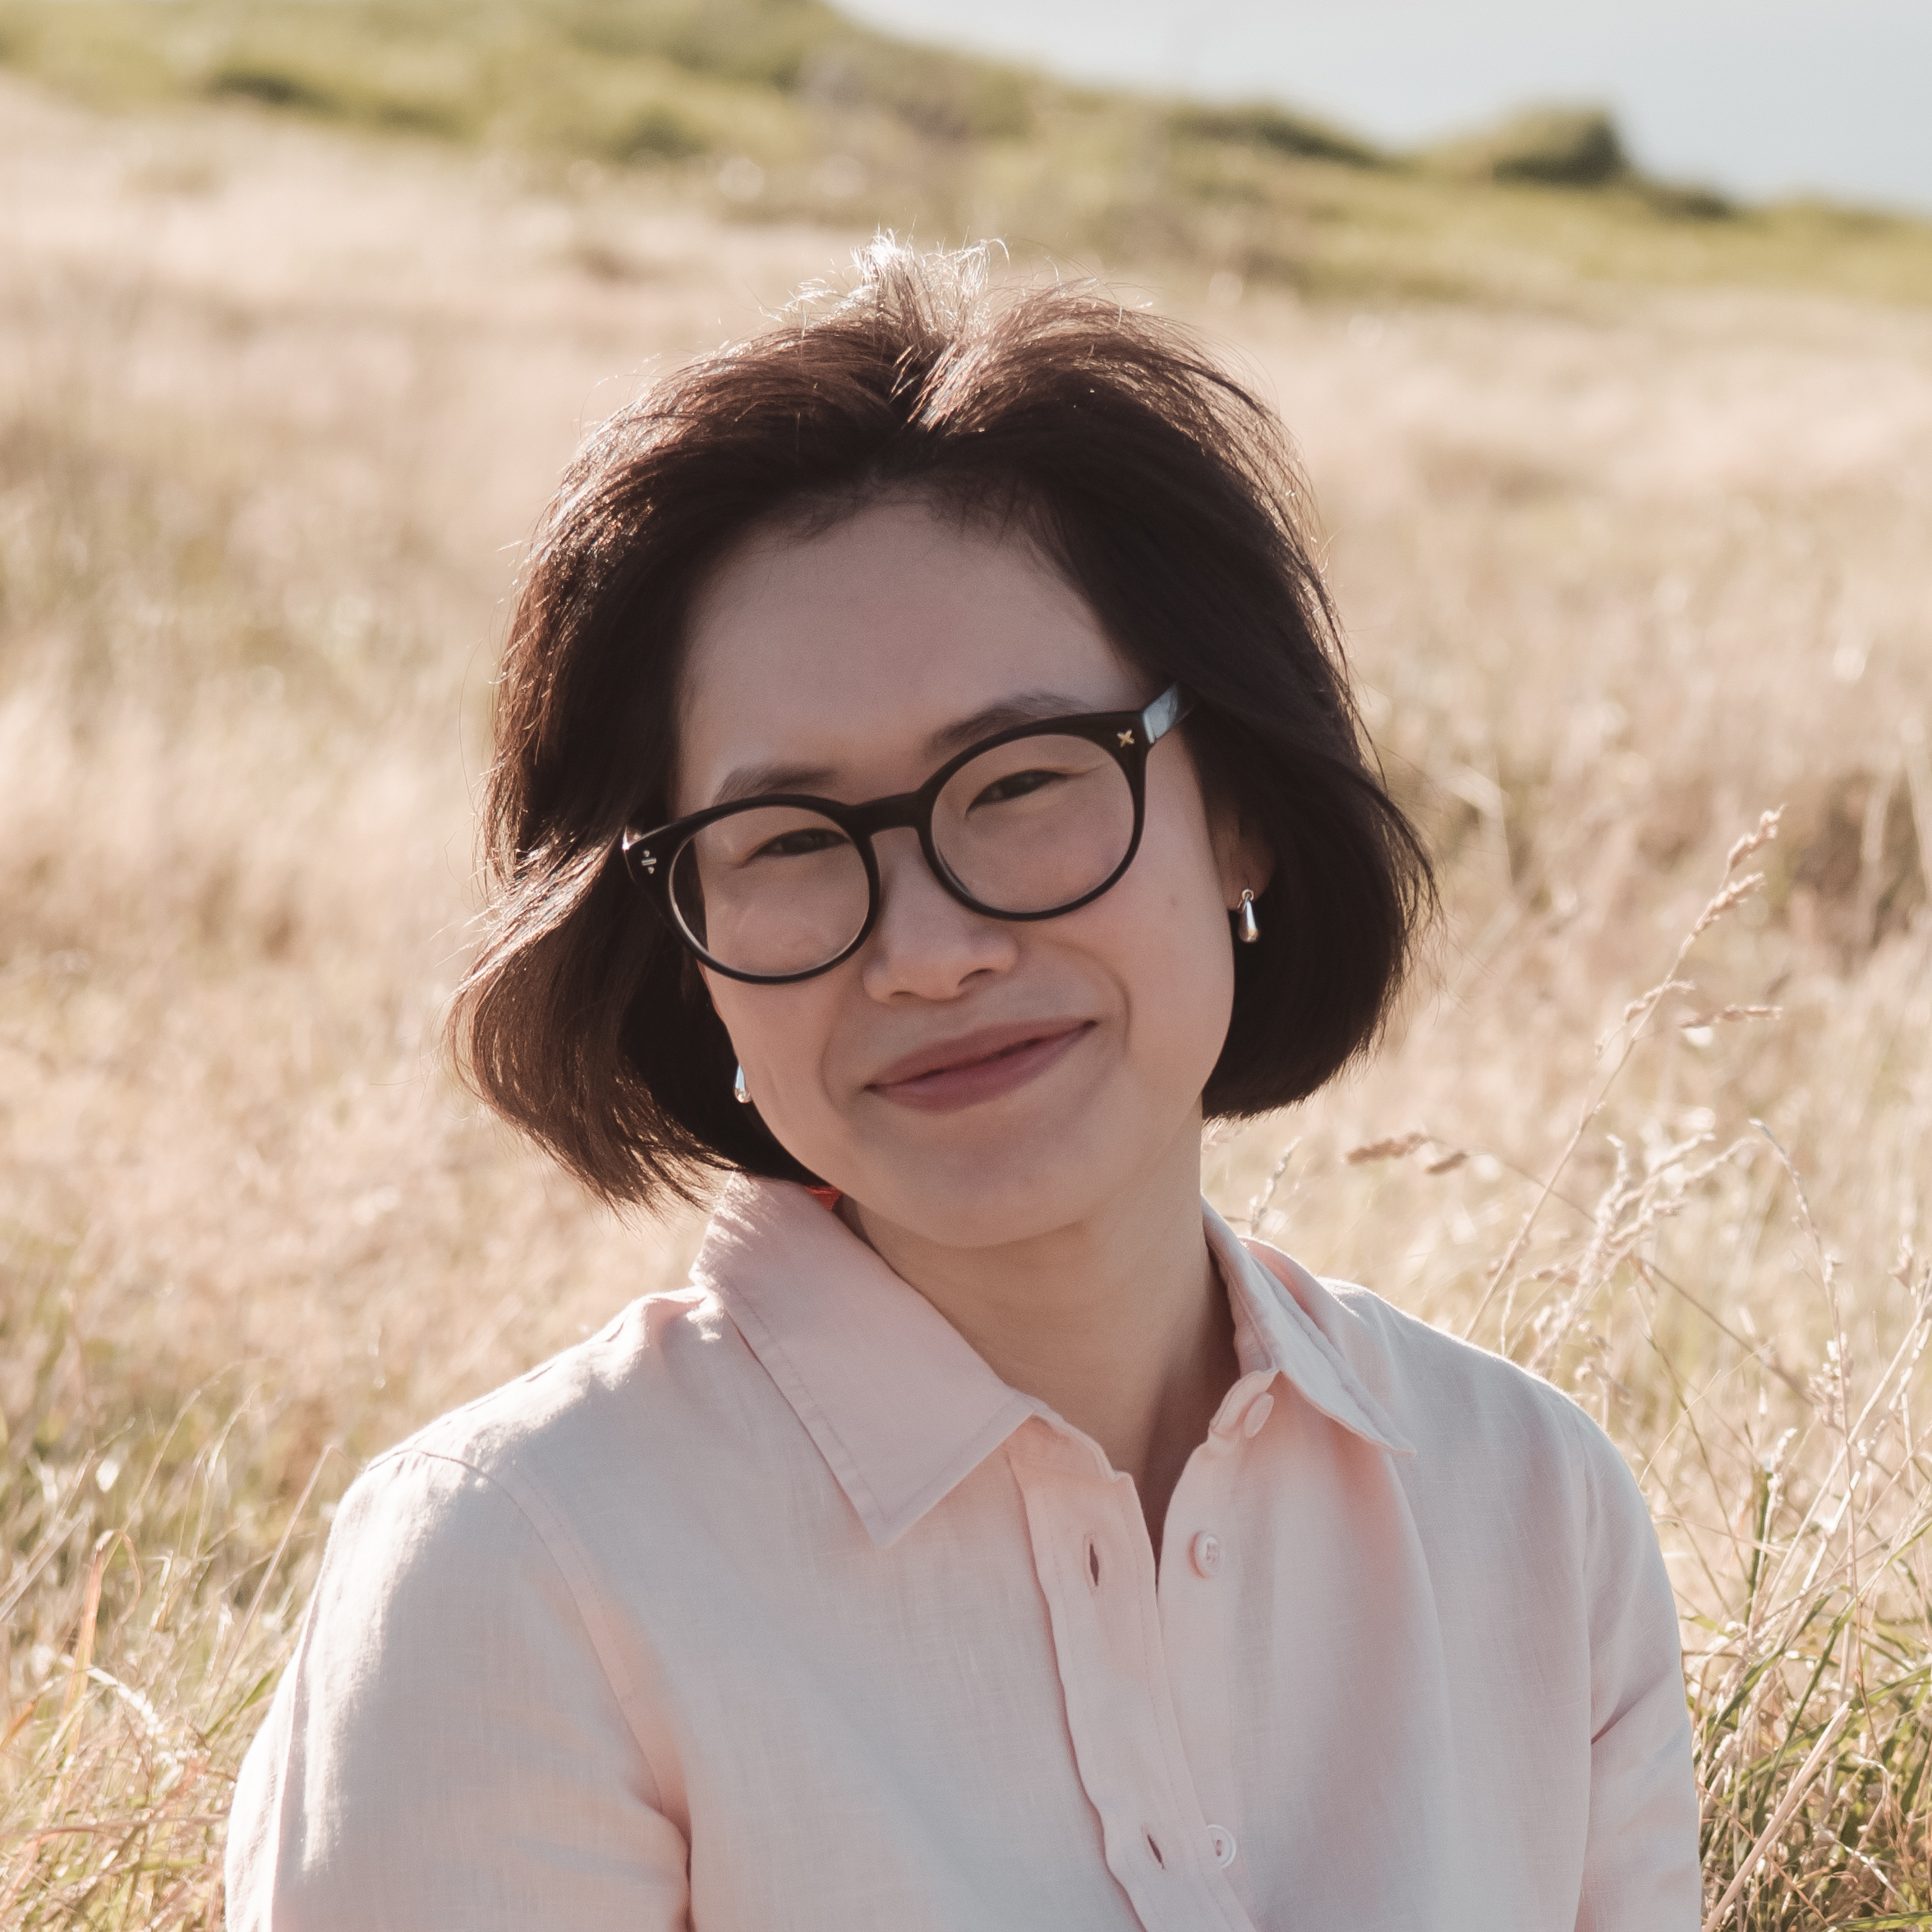 Headshot of Prae Songprasit with semi-long black hair, black glasses, smiling kindly at the camera. She's wearing a light peach shirt, with golden grassy background